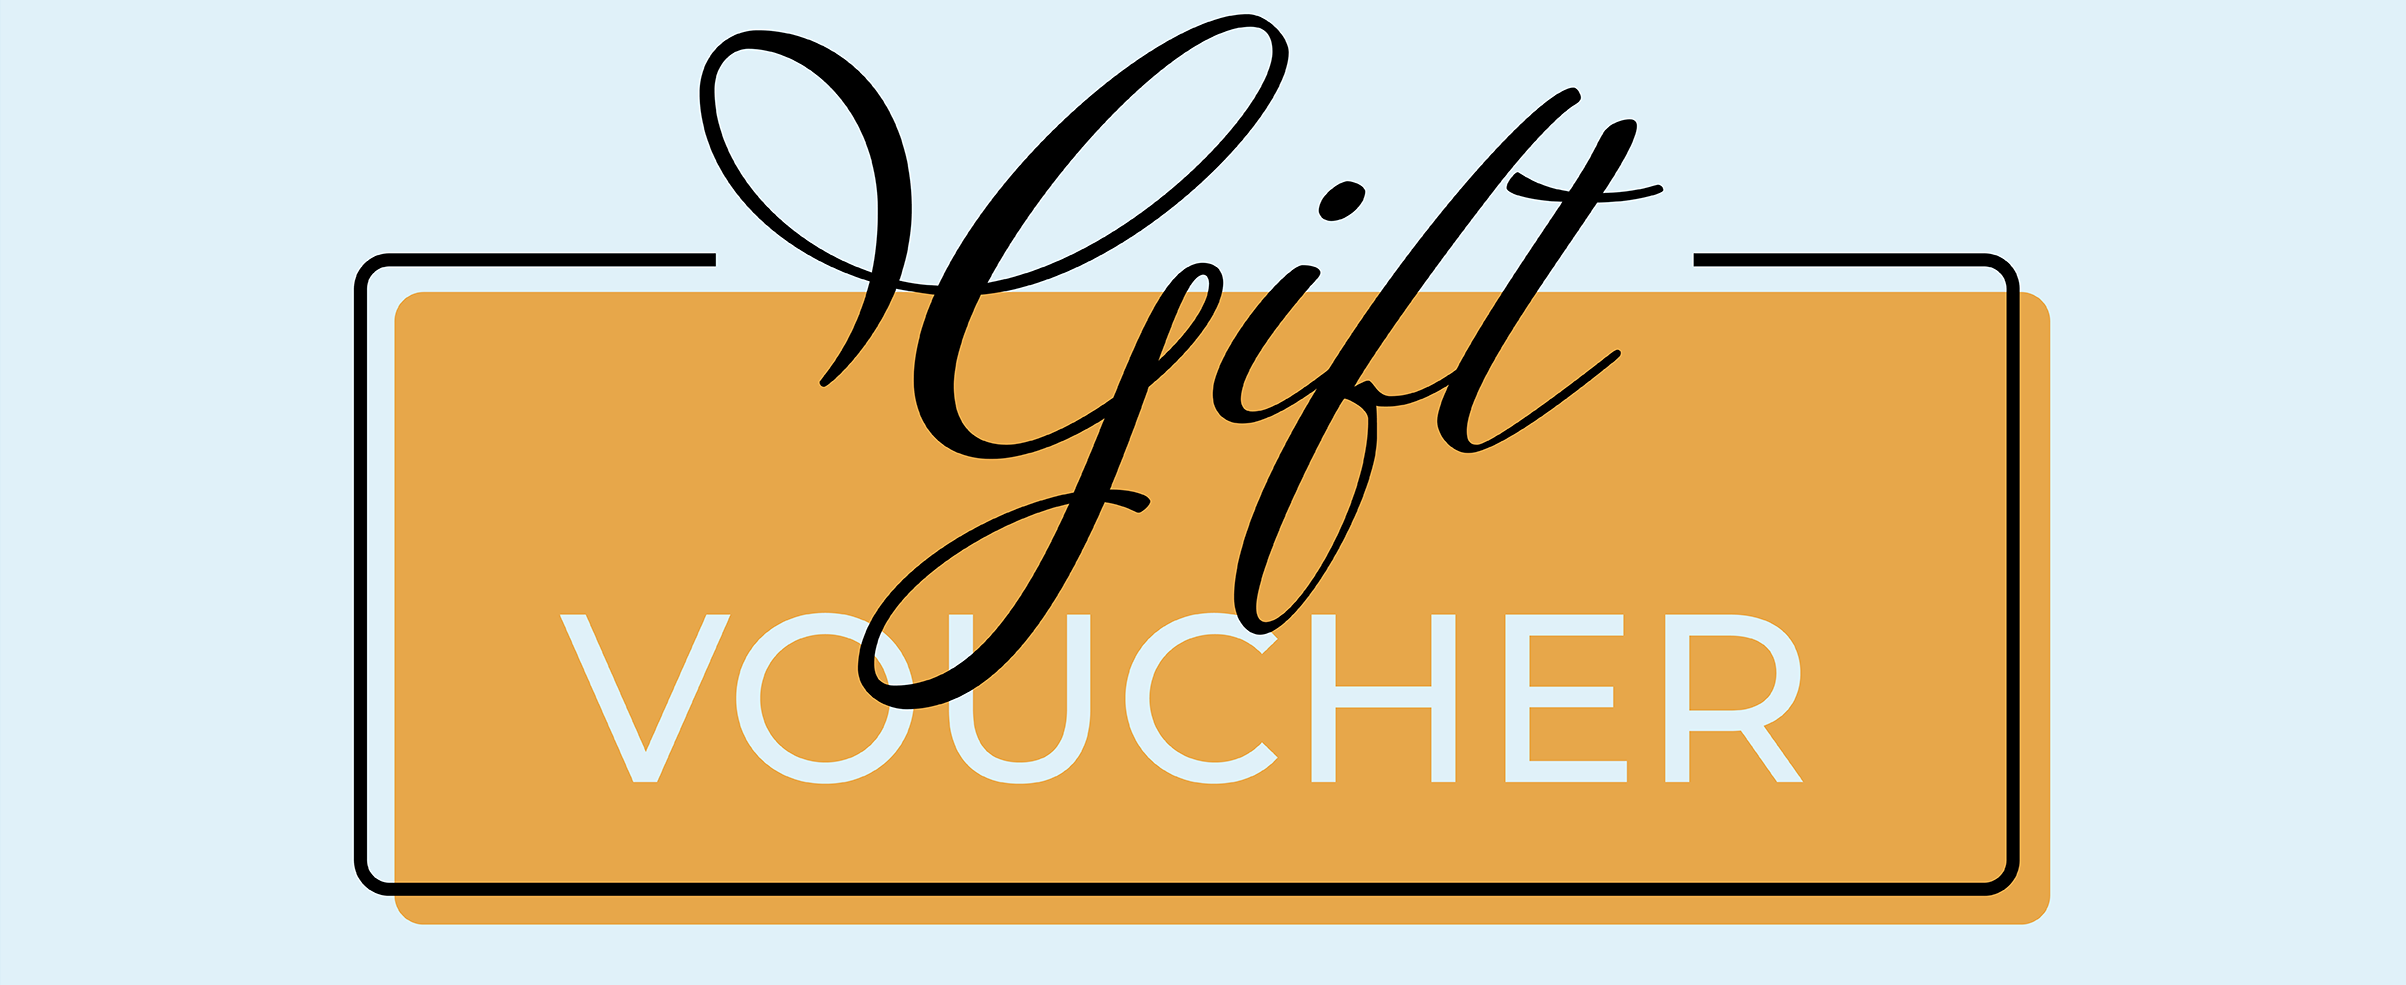 Buy now a gift voucher for your friend